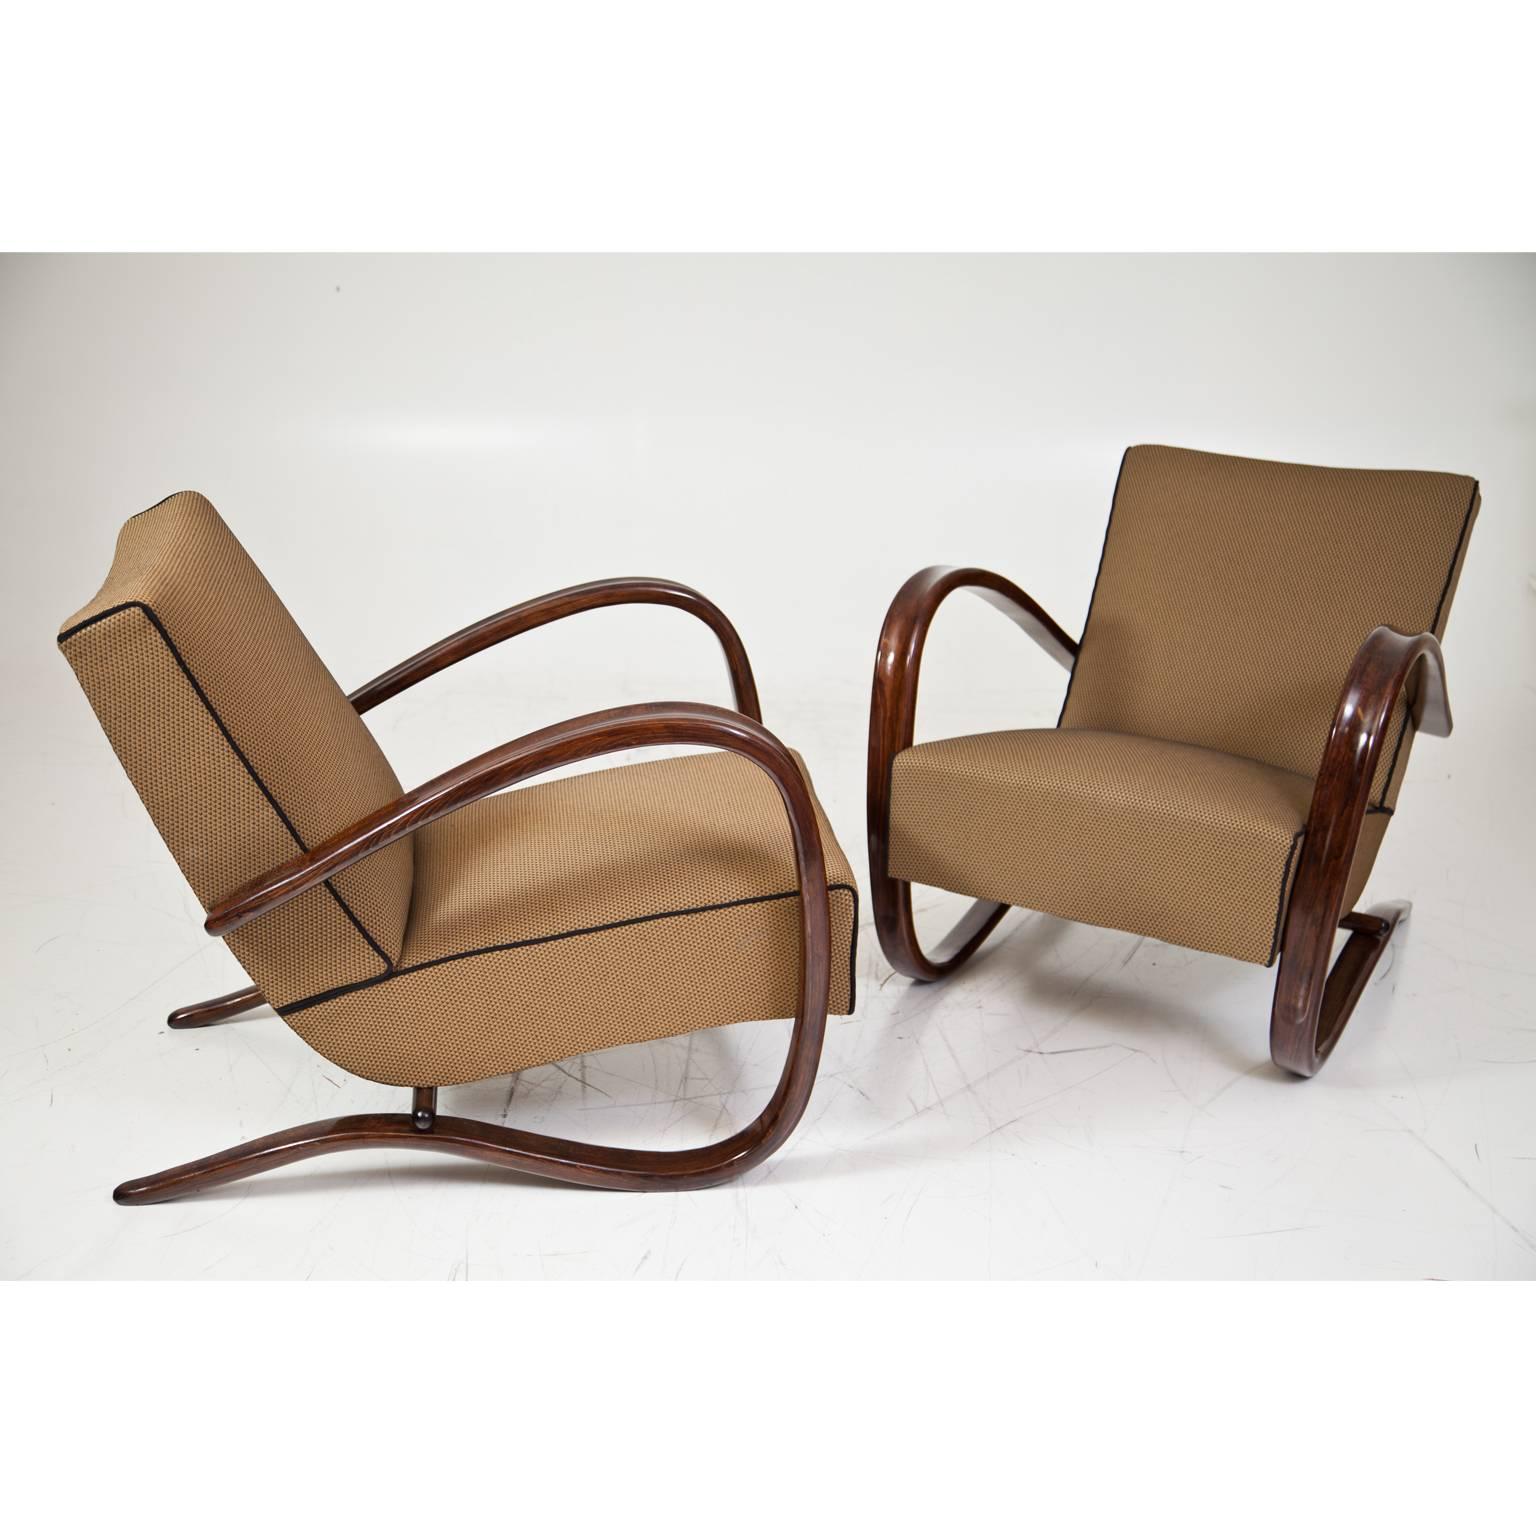 Iconic pair of chairs from the famous Czech designer Jindrich Halabala. The dark-stained armrests flow in an elegant c-shape around the side of the seating surface and become the frame of the chair. The chairs have been reupholstered.
   